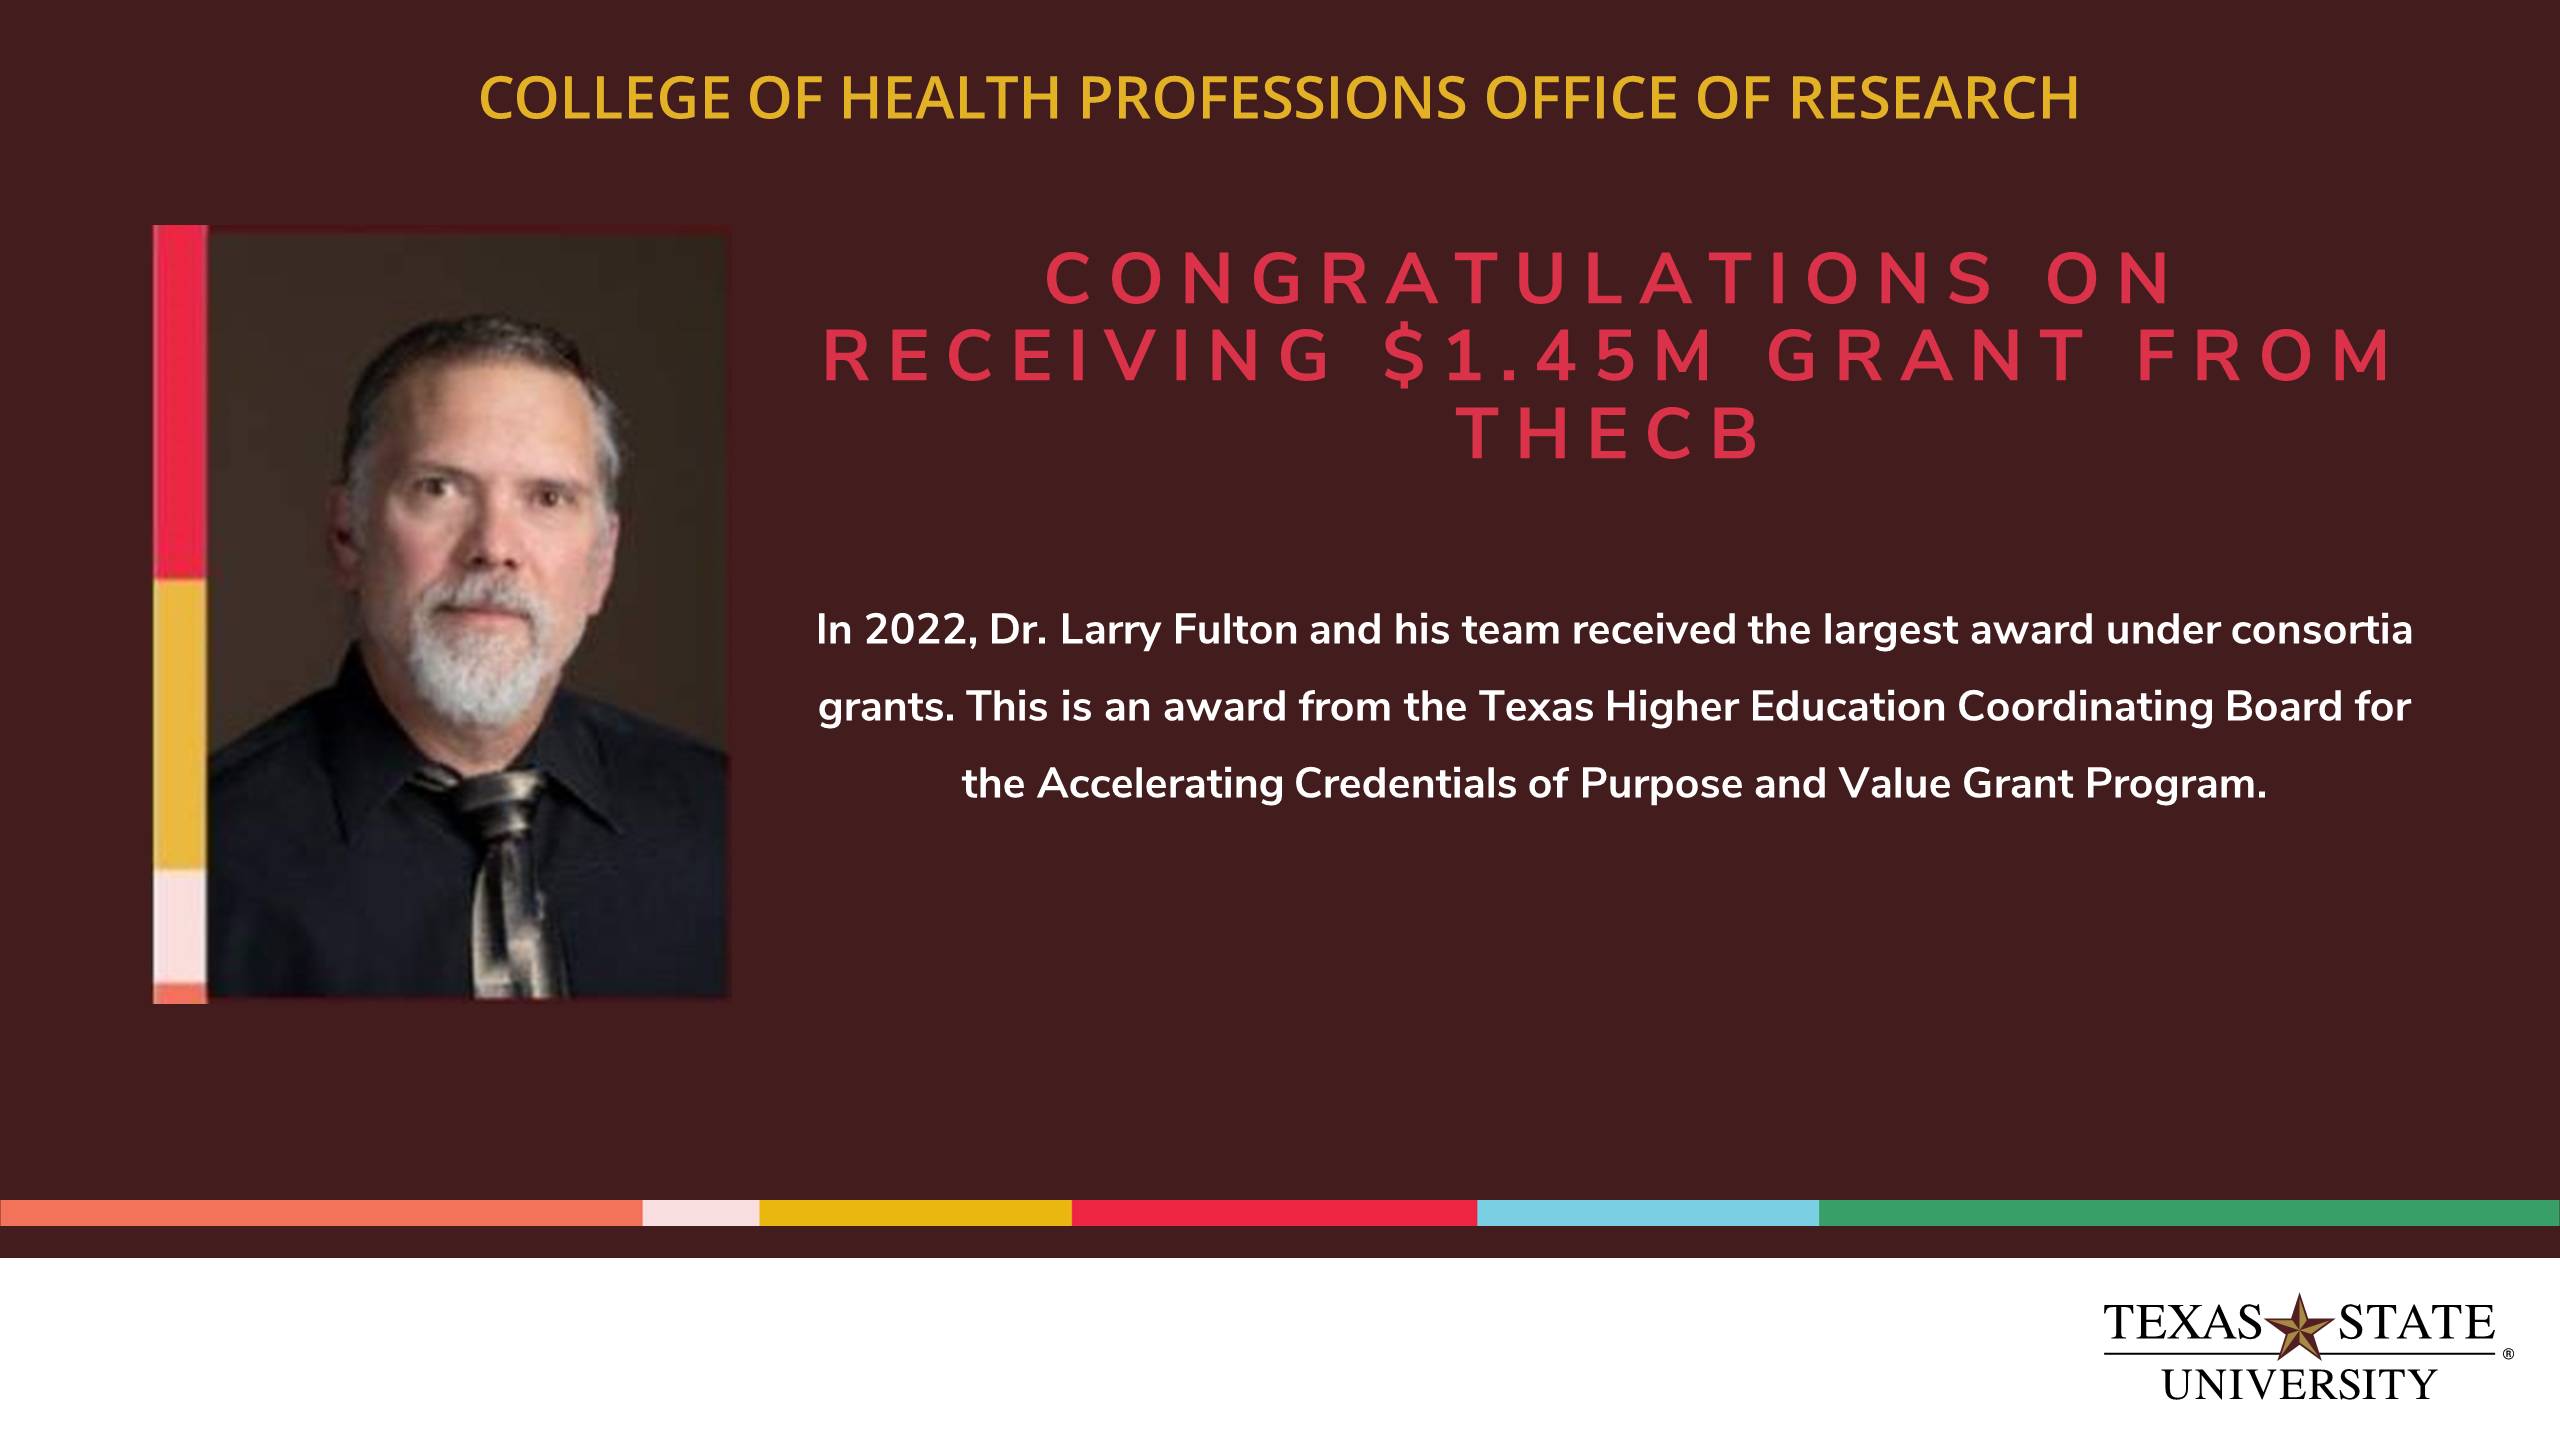 Dr. Larry Fulton receives $1.45M grant from THECB